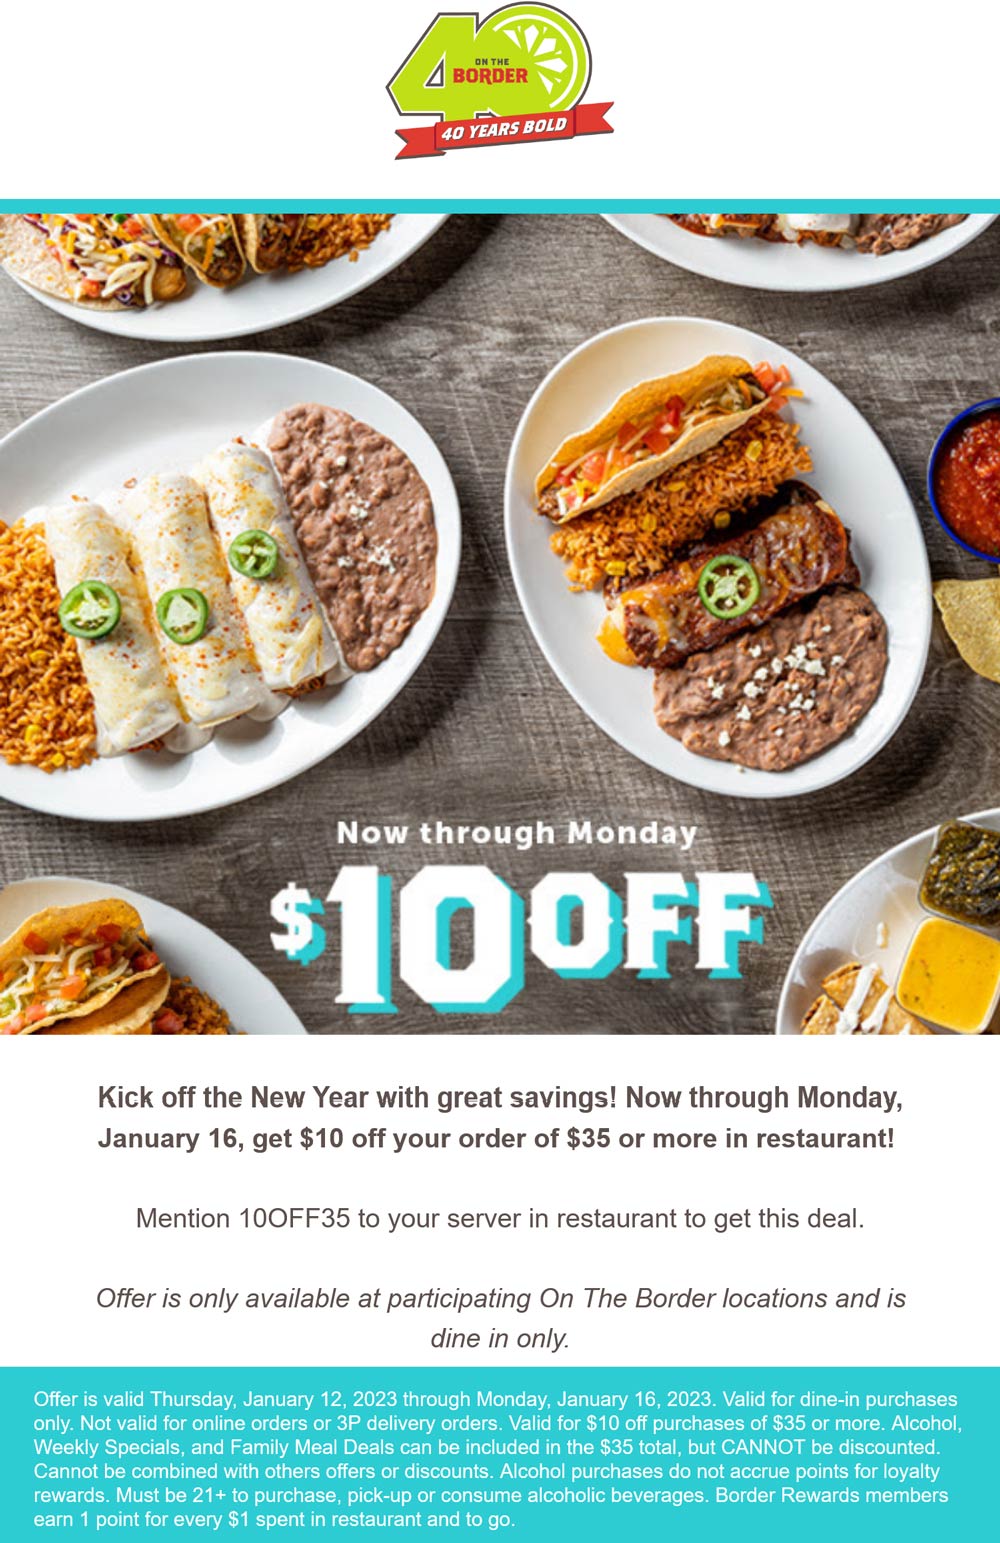 On The Border restaurants Coupon  $10 off $35 at On The Border restaurants via promo code 10OFF35 #ontheborder 